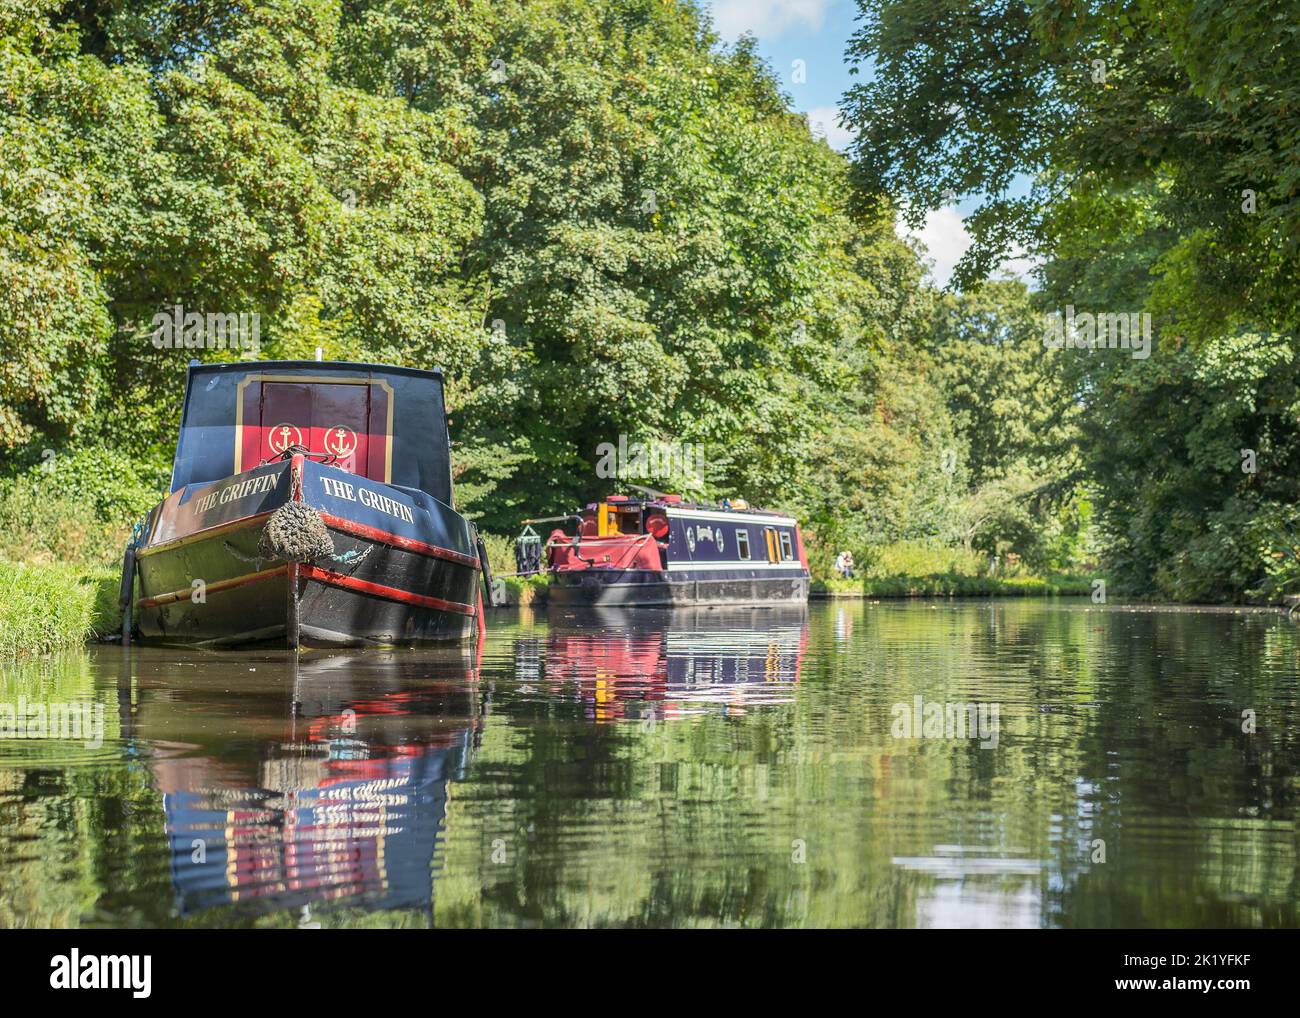 Low angle view of two canal boats moored at the side of a wide canal with their reflections in the water on a sunny day. Stock Photo